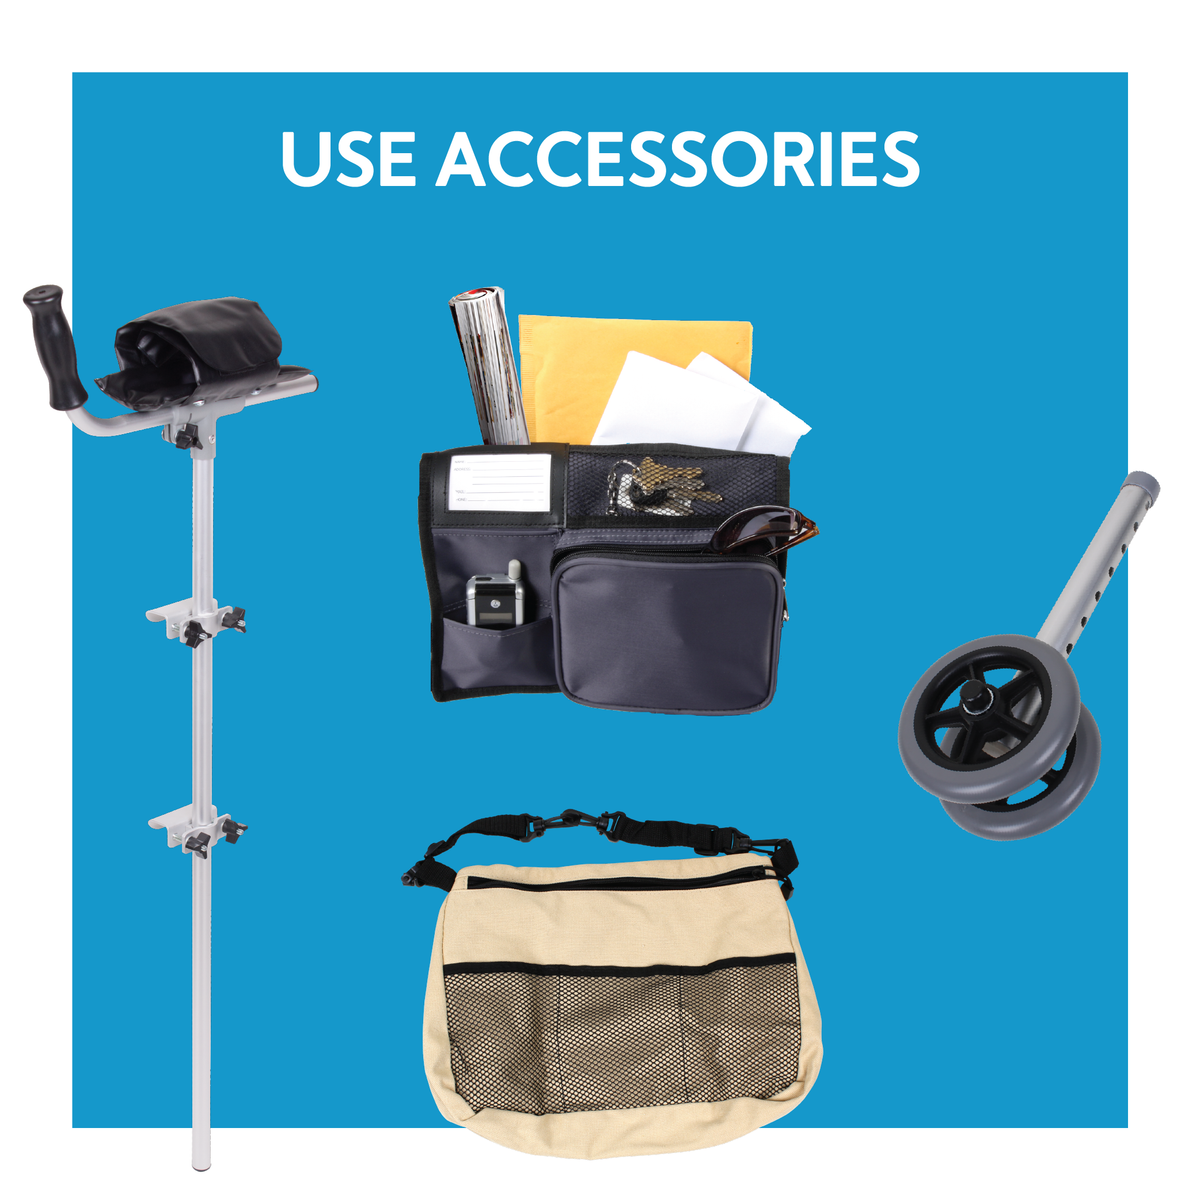 Use accessories